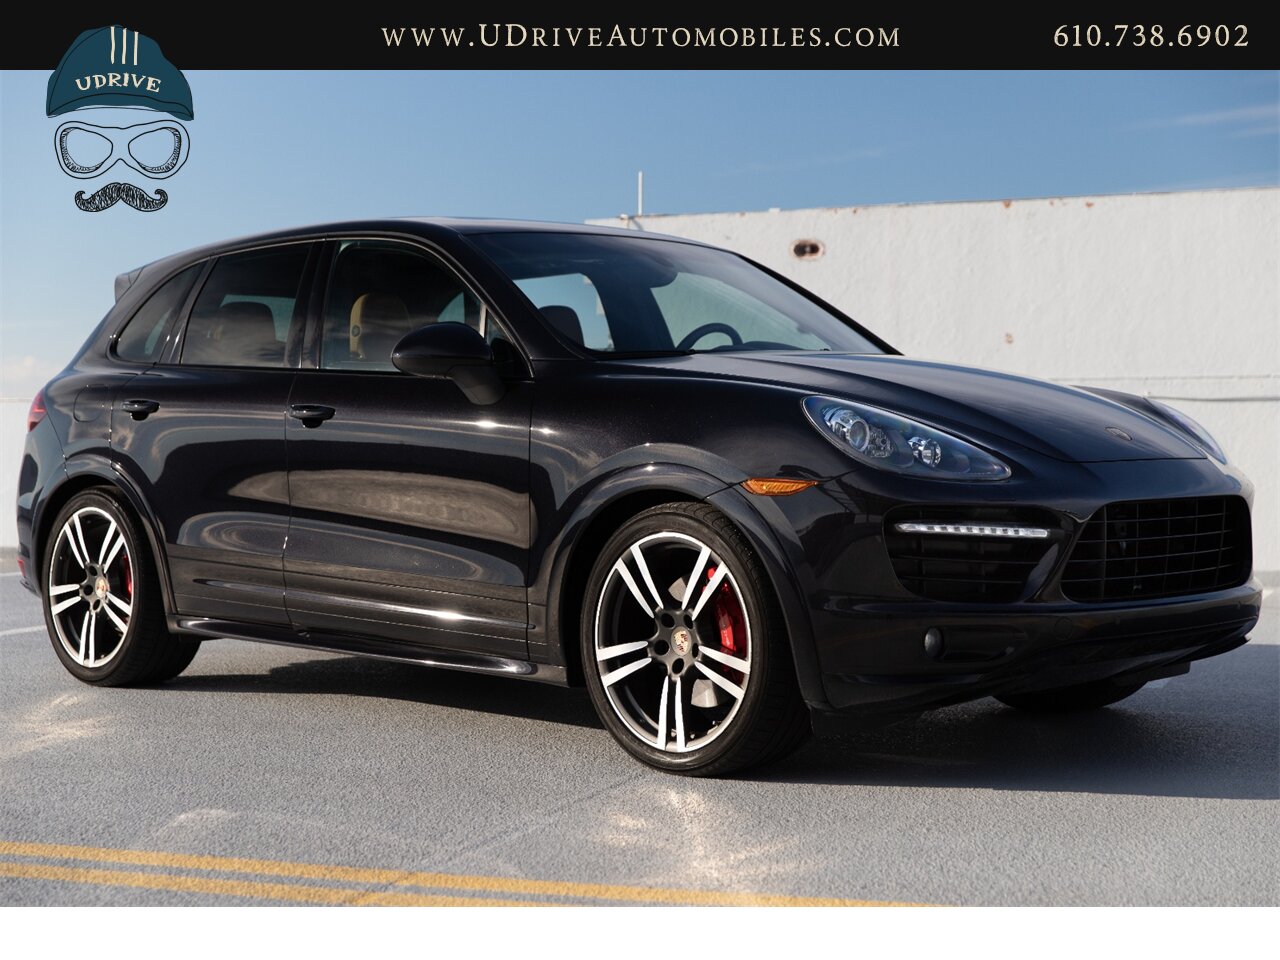 2013 Porsche Cayenne GTS Service History 1 Owner 21in Wheels  Espresso / Cognac Two Tone Leather - Photo 16 - West Chester, PA 19382